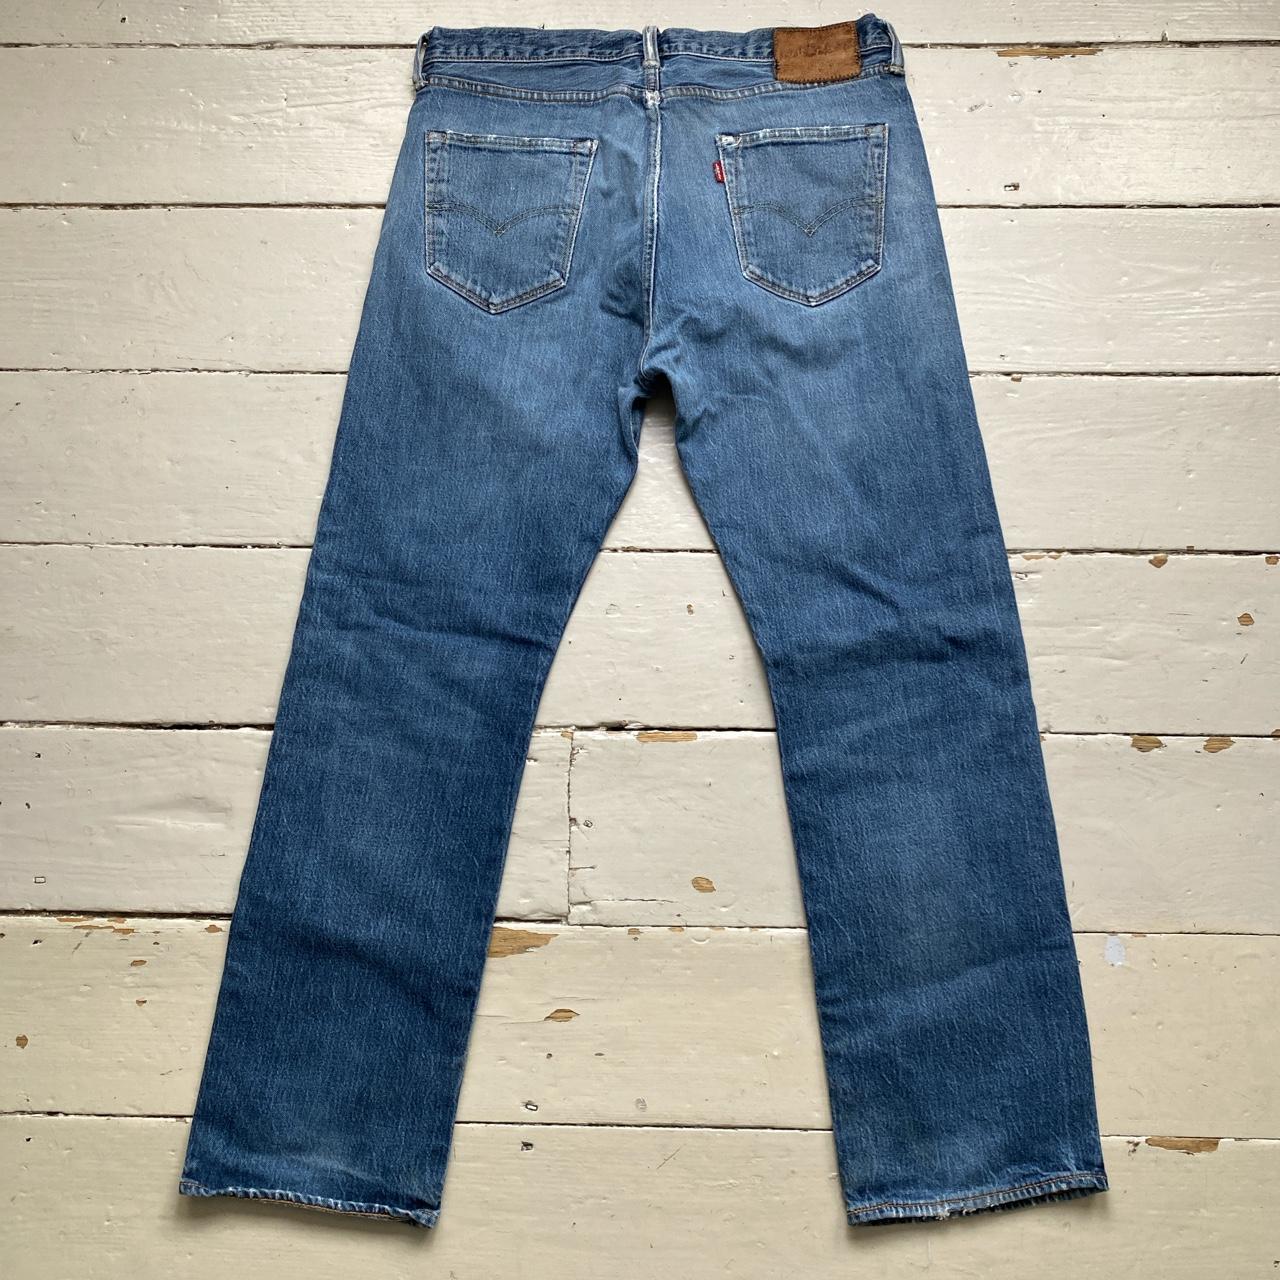 Levis 501 Baggy Stonewashed Jeans